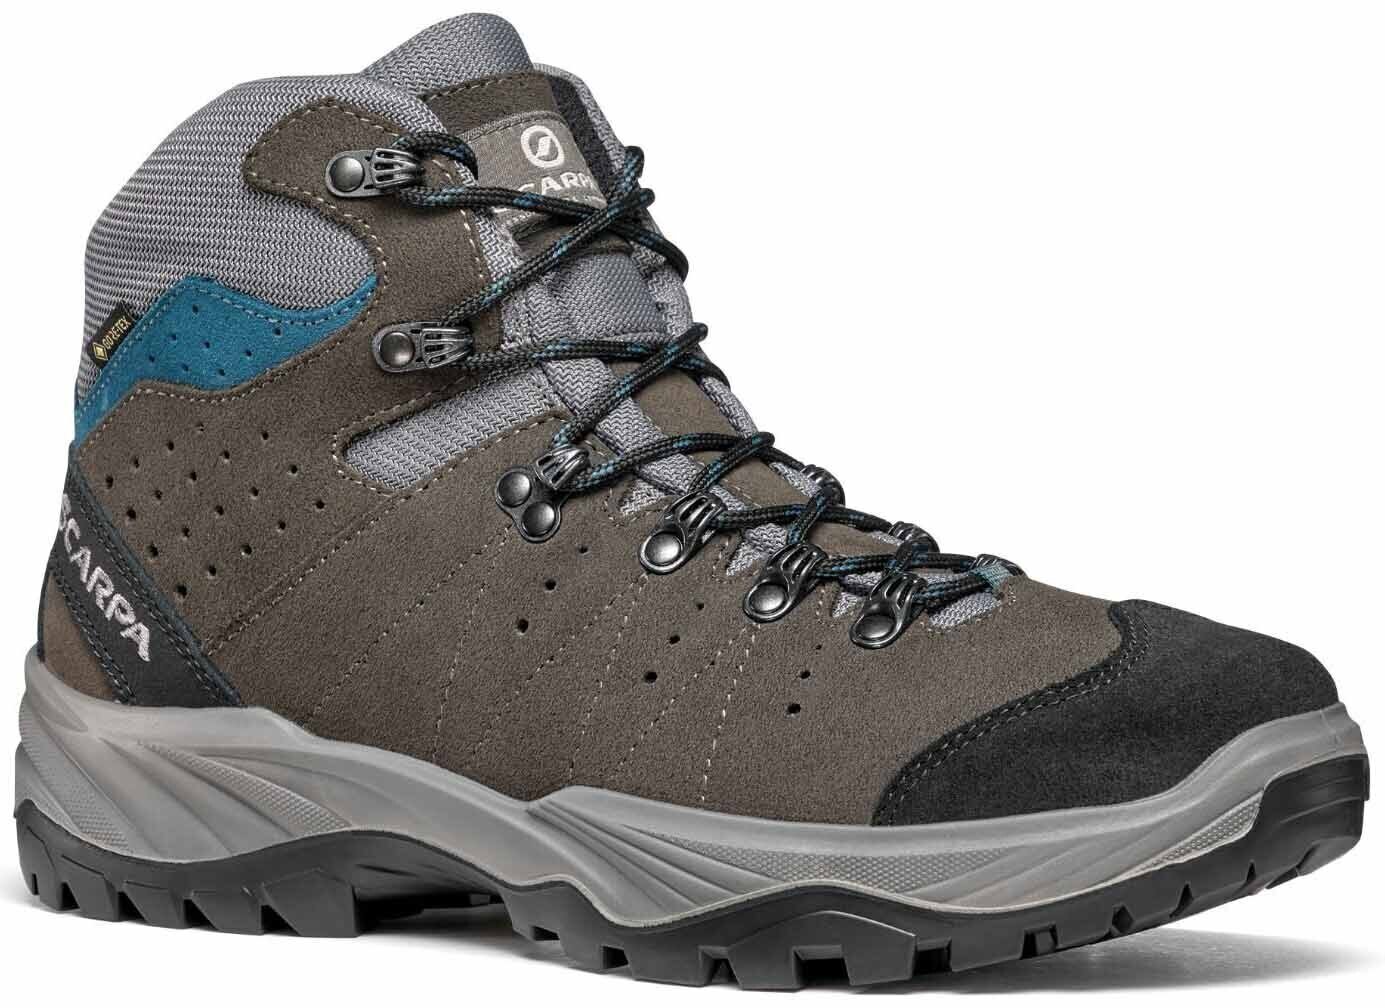 Chaussures outdoor hommes Scarpa Mistral Gore Tex Smoke/Lake Blue 44 Chaussures outdoor hommes